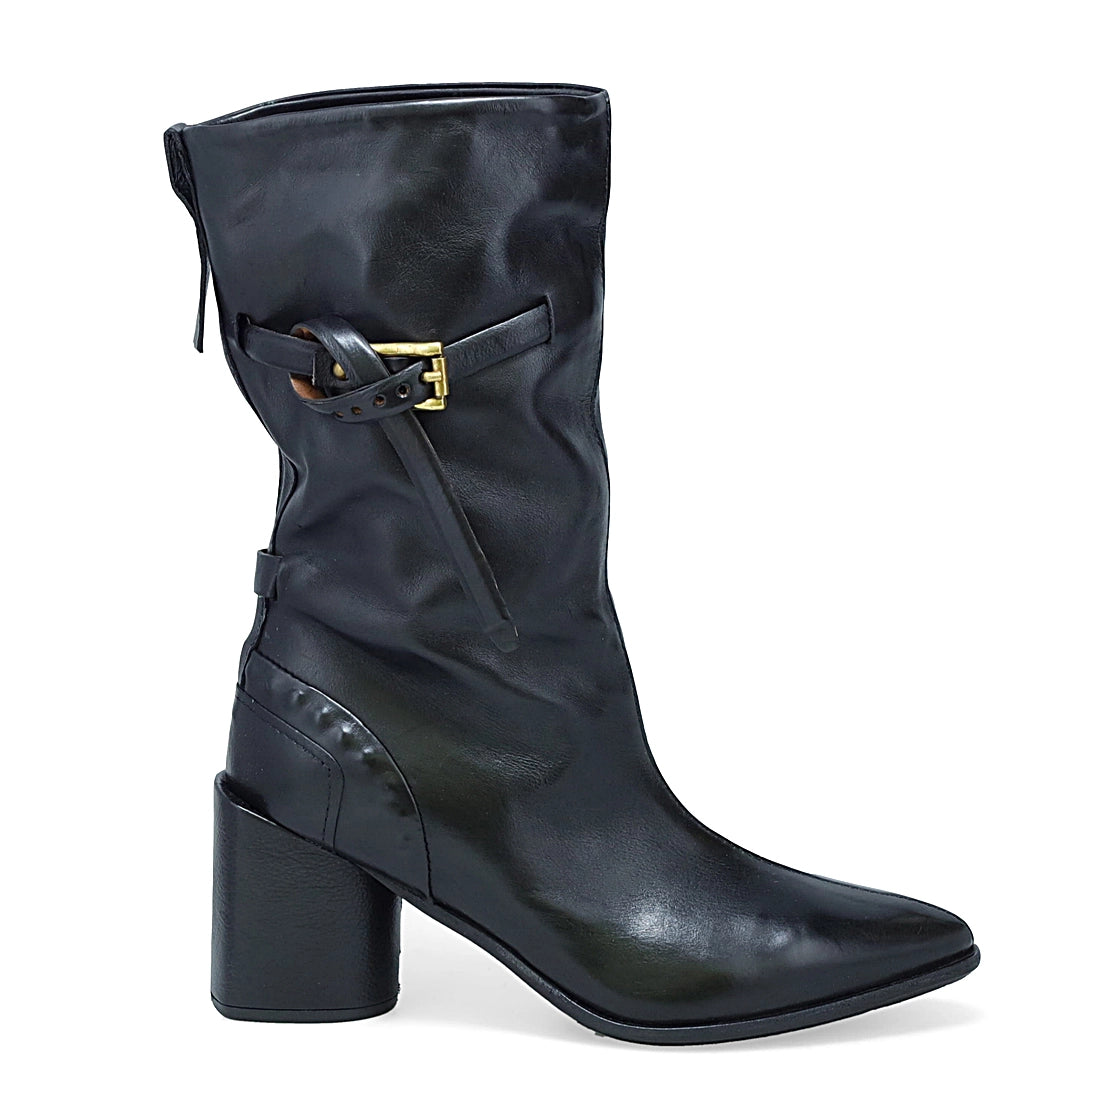 A.S. 98 Ebby Heeled Leather Boot - Black